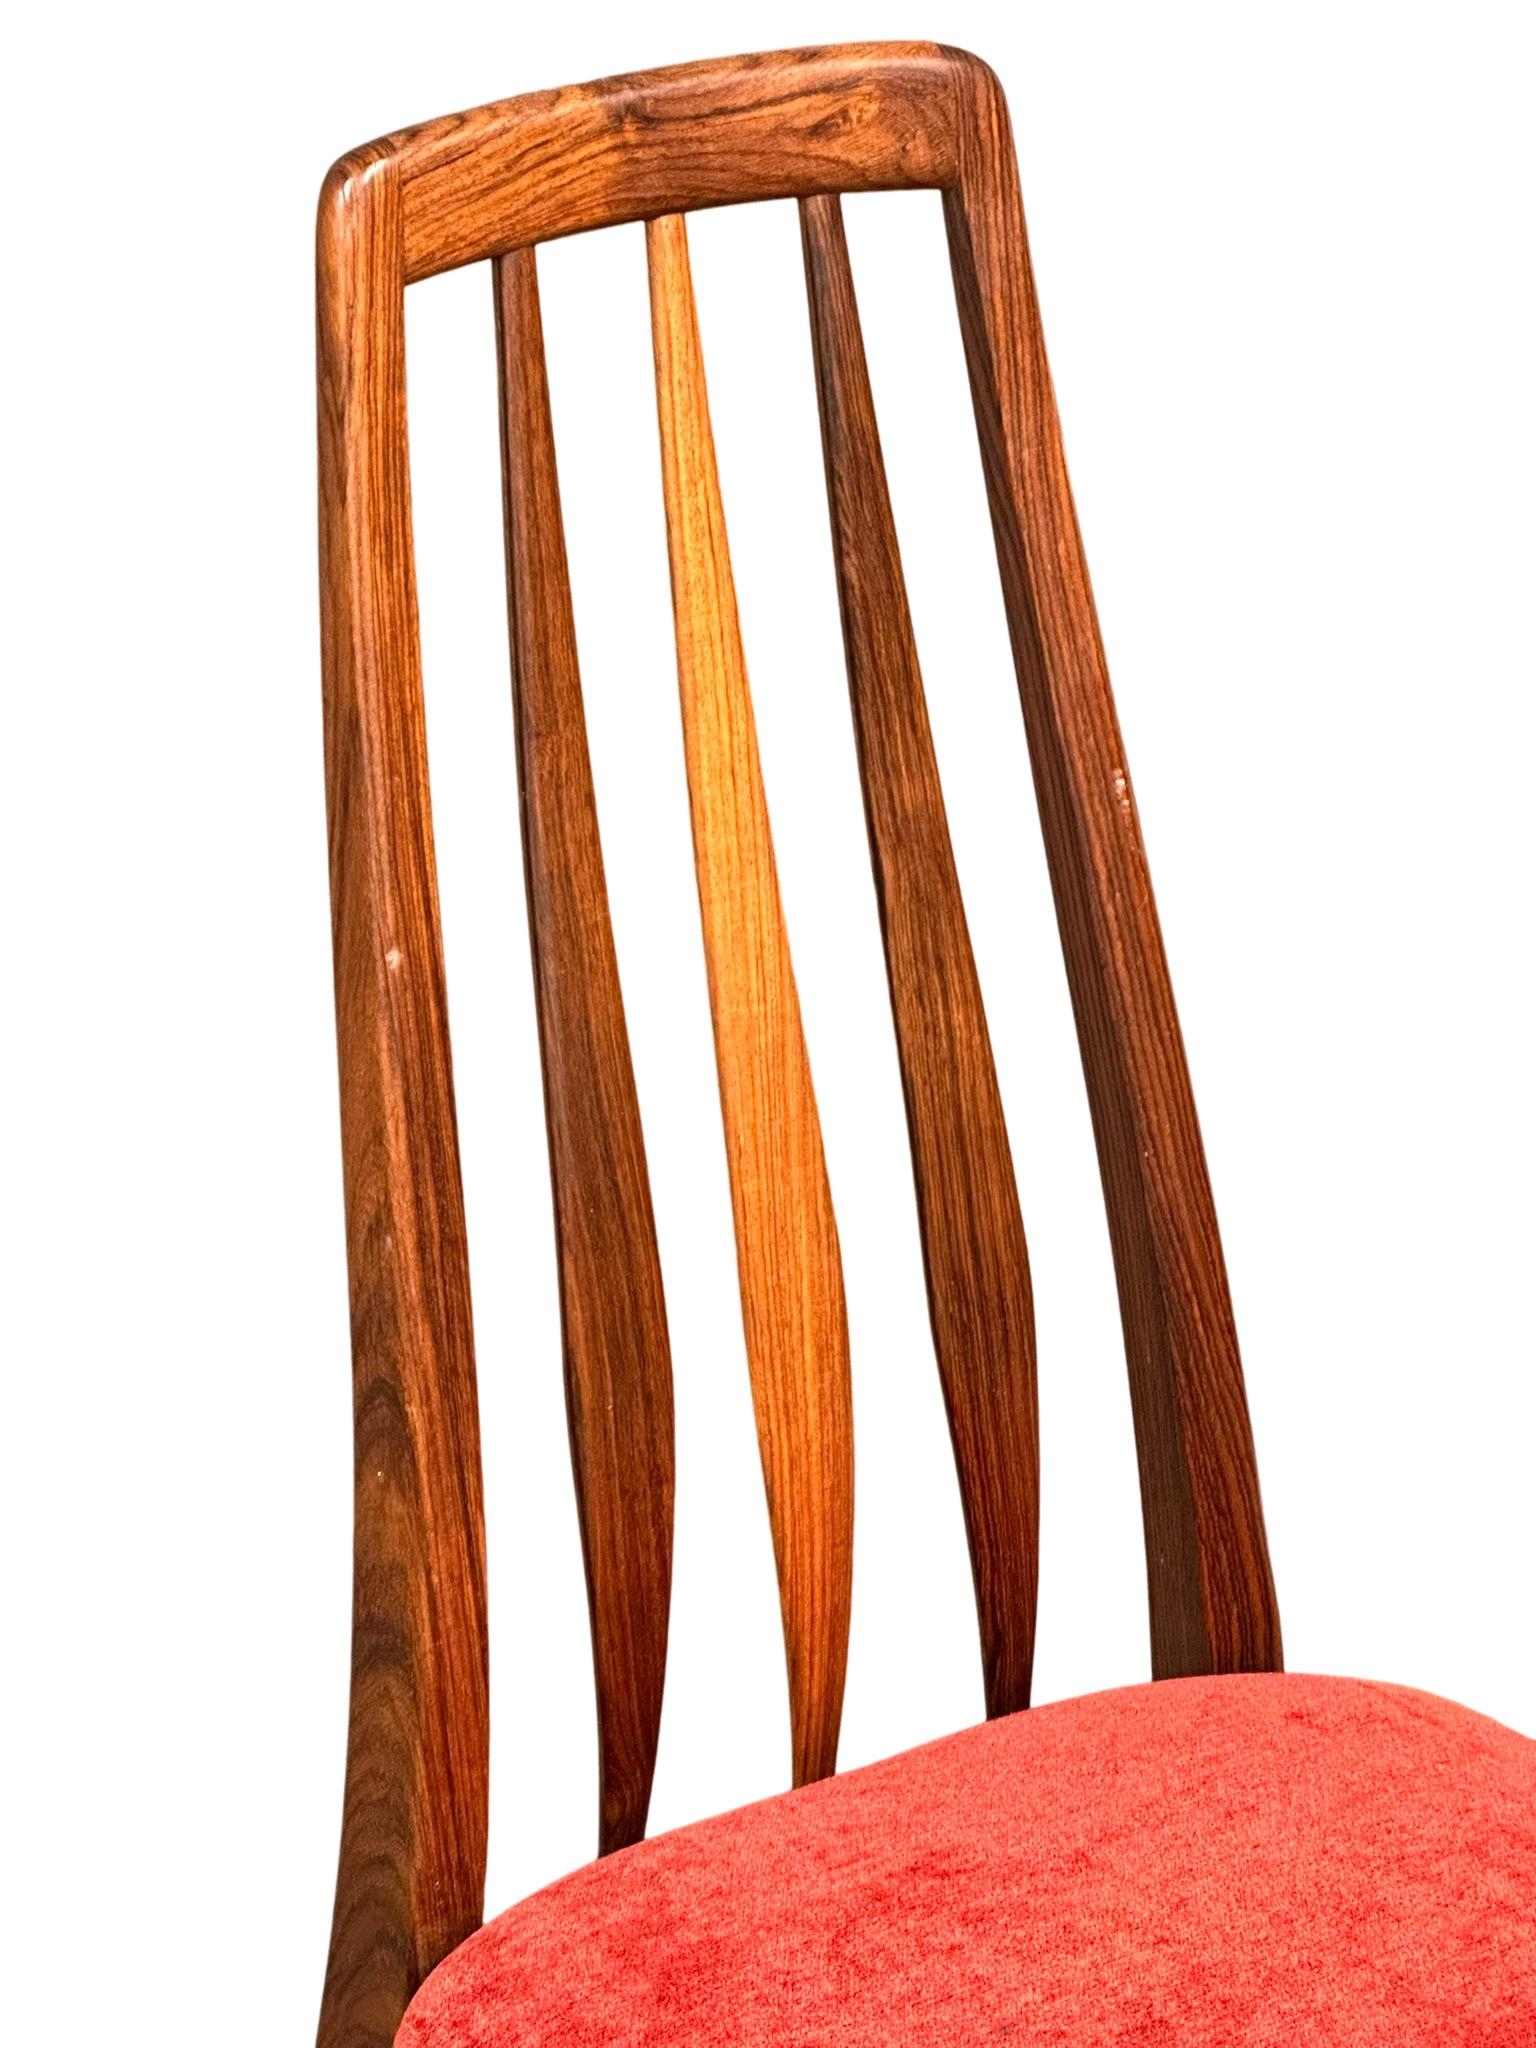 An exceptional quality rare set of 11 Danish Mid Century rosewood ‘Eva’ chairs, Niels Koefoed - Image 13 of 16